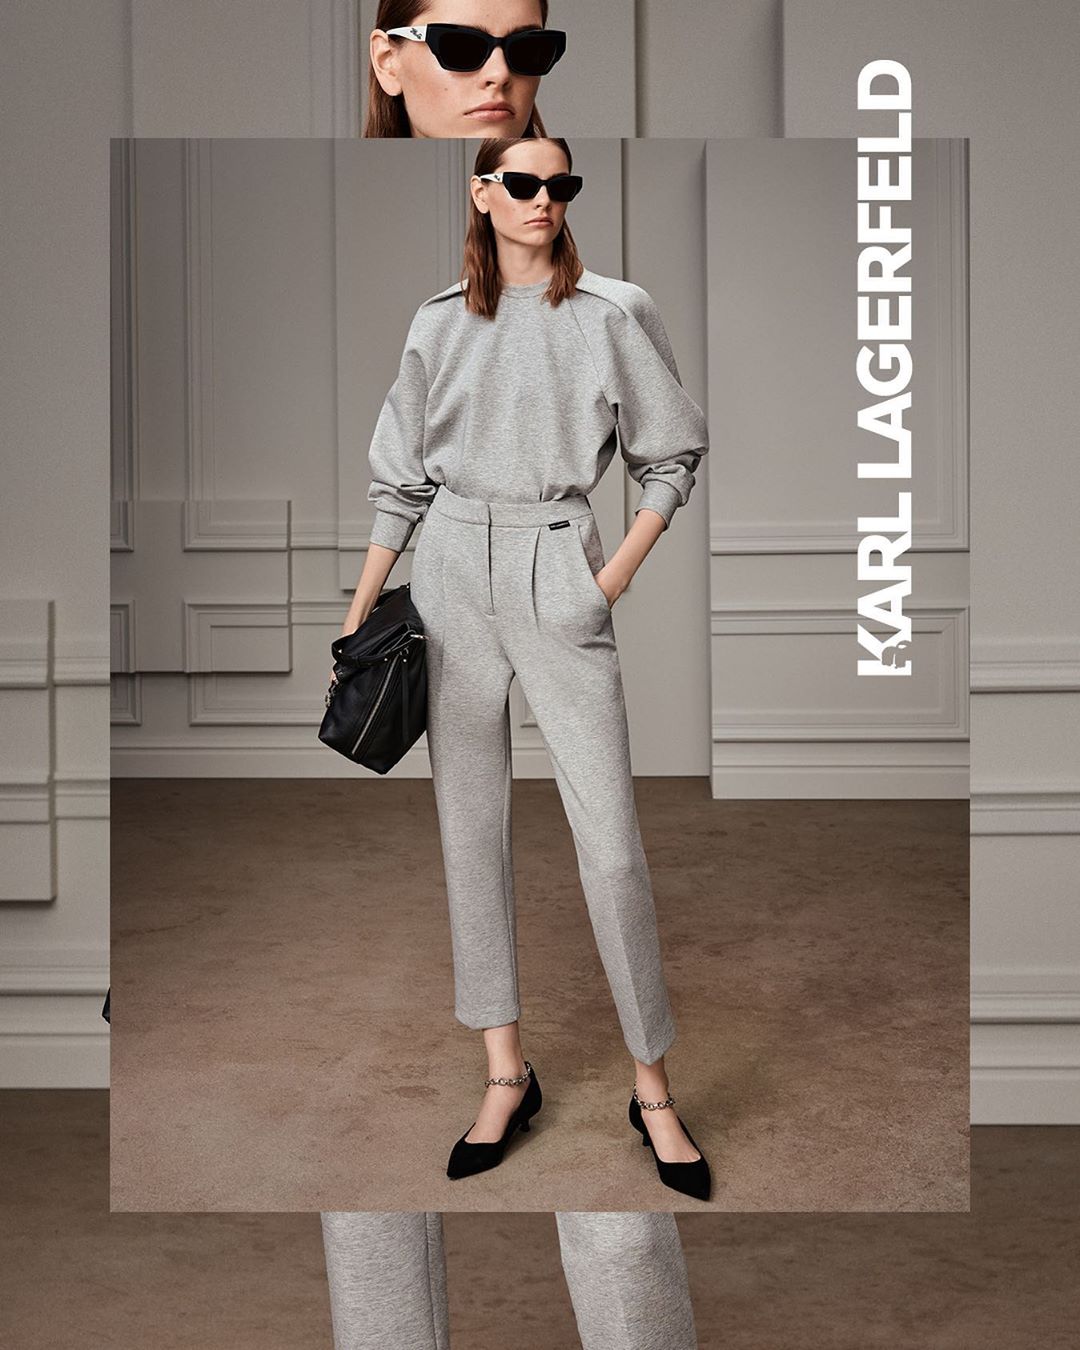 KARL LAGERFELD - A new take on suiting for Fall 2020: crafted from soft cotton, this monochromatic look combines sophistication and comfort. #KARLLAGERFELD #FALL2020